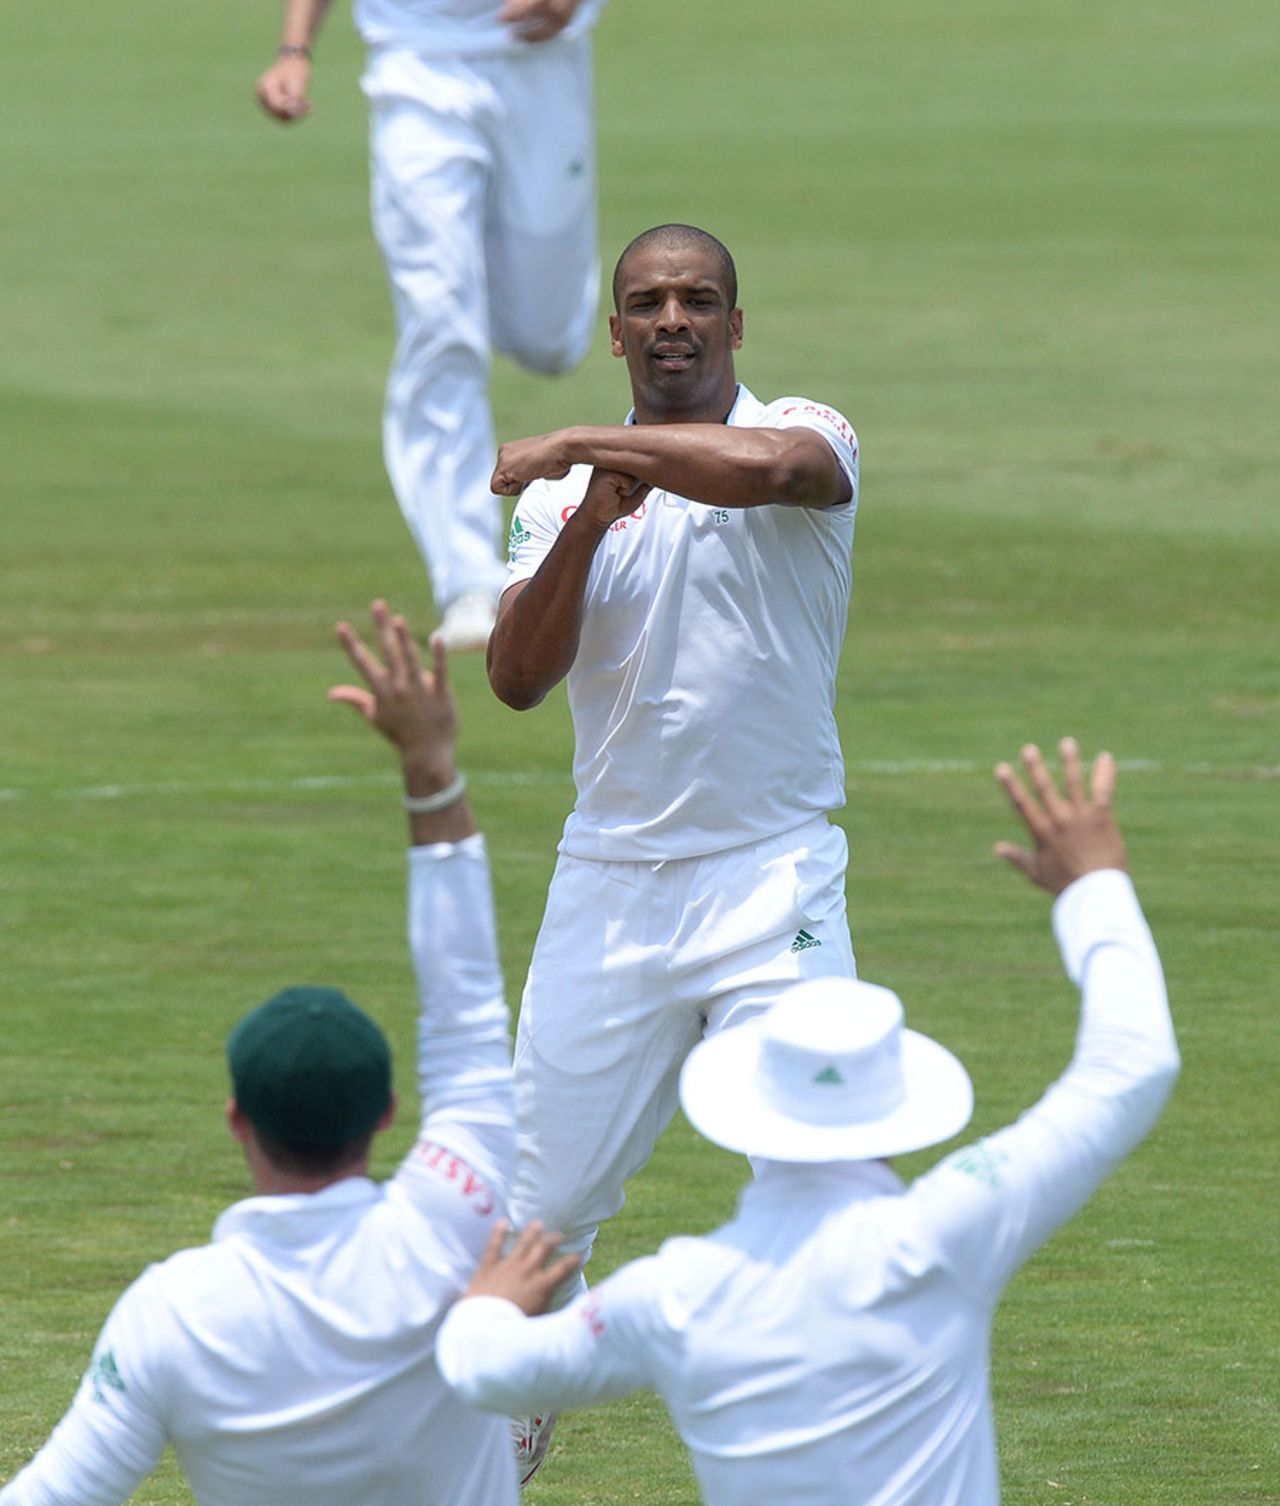 Vernon Philander had Devon Smith caught behind after a controversial review, South Africa v West Indies, 1st Test, Centurion, 3rd day, December 19, 2014